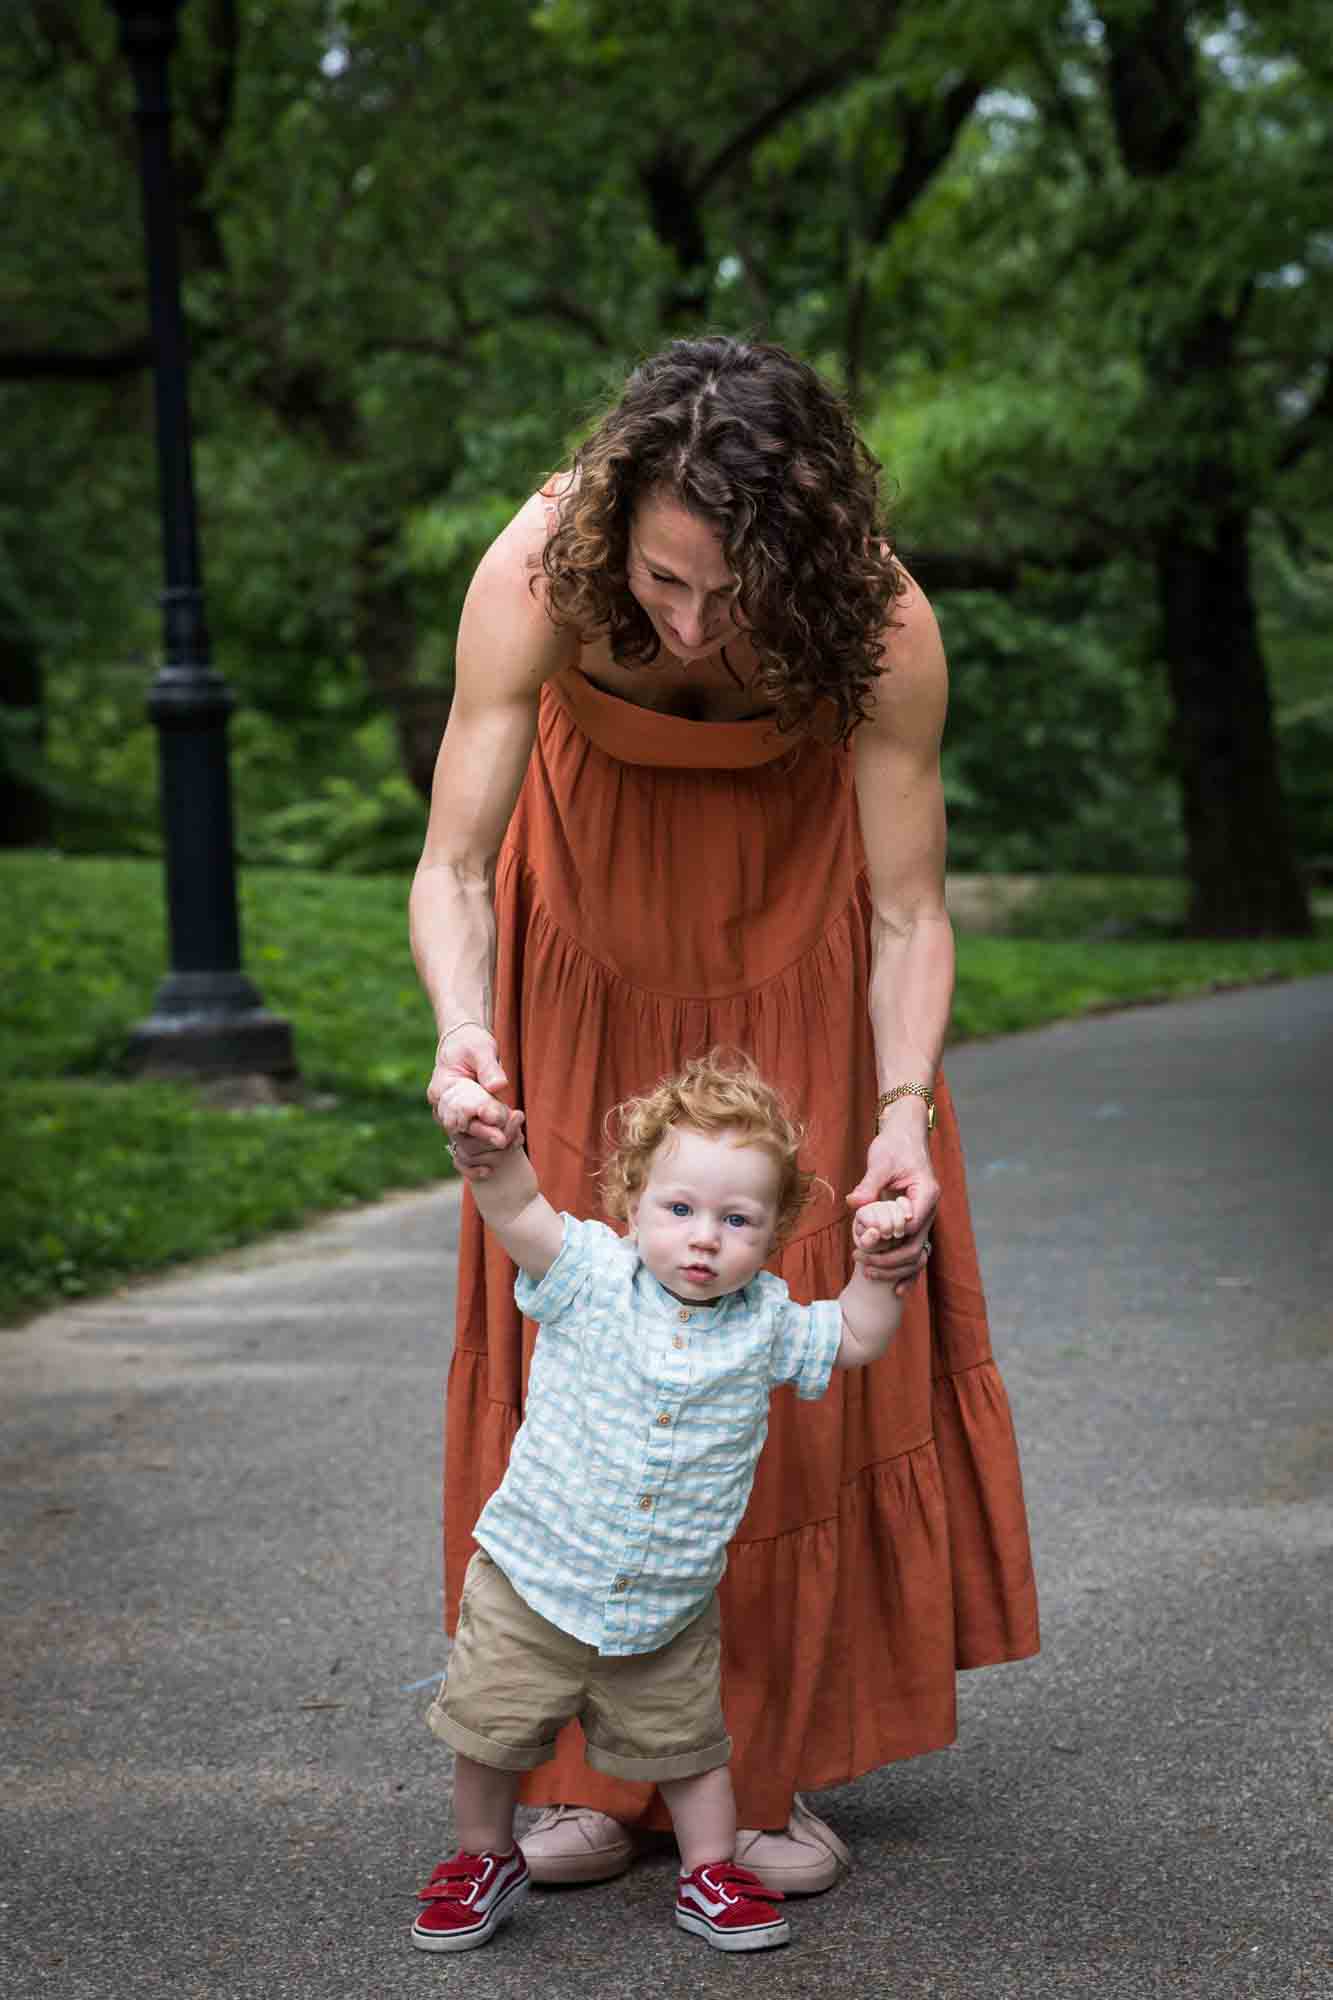 Mother wearing orange dress helping red-haired baby boy walk down a pathway during a Central Park family portrait session